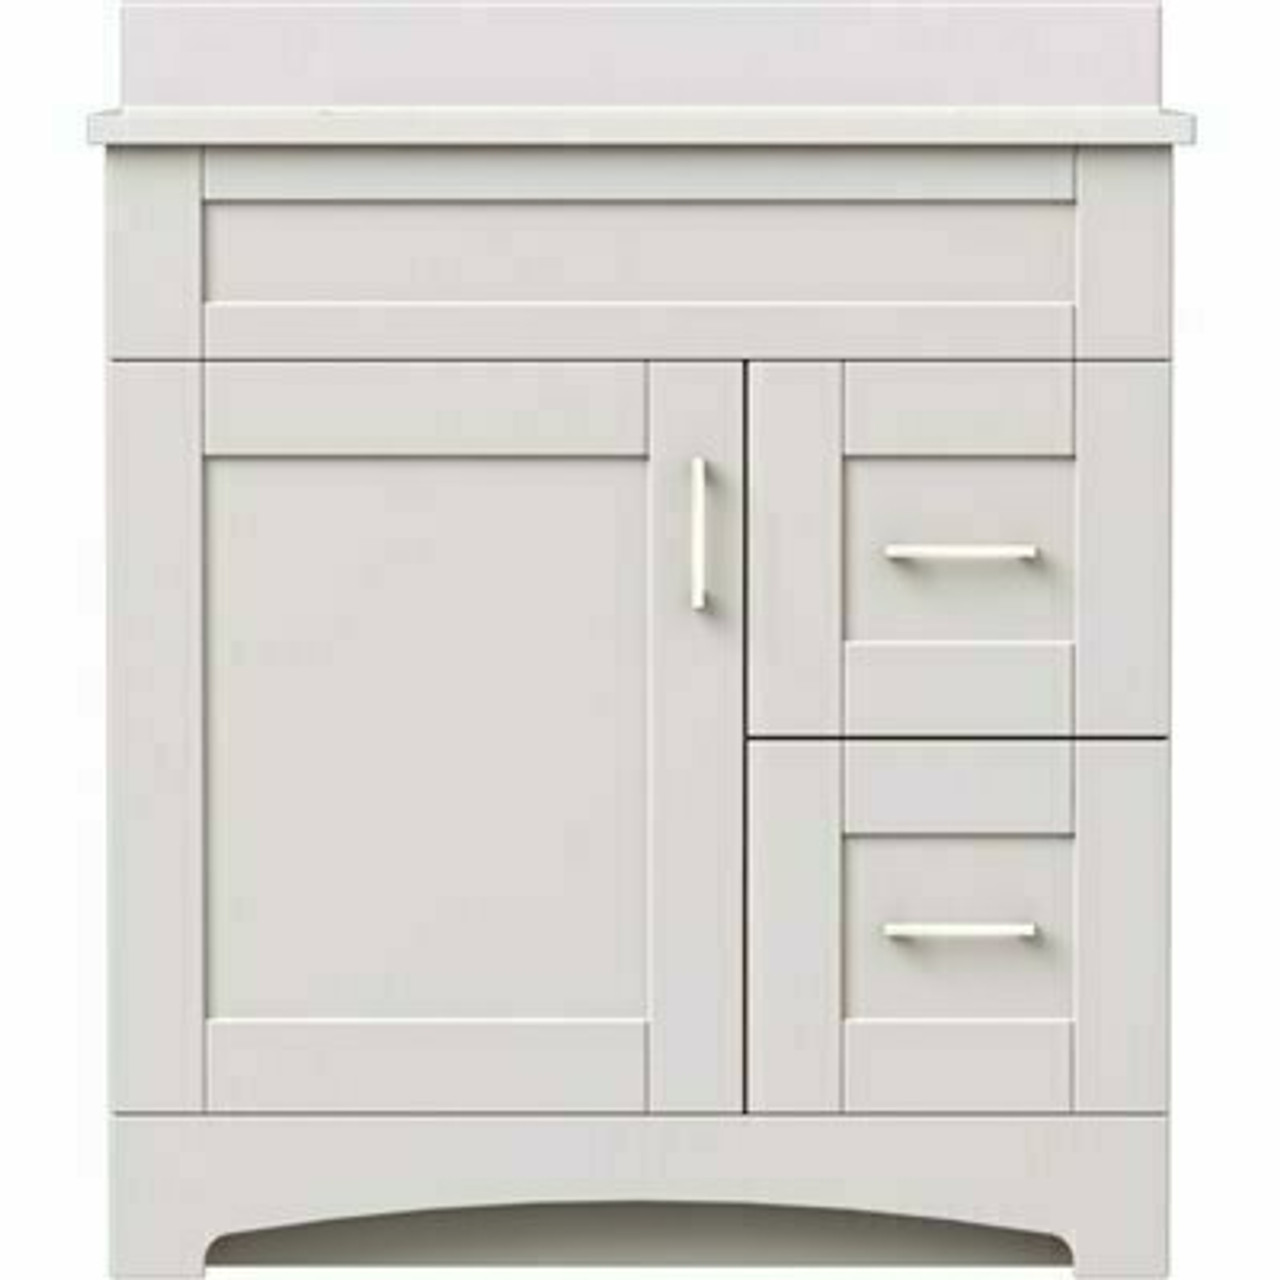 Magickwoods Brixton 30 In. W X 21 In. D Bath Vanity Cabinet In Vanilla White With Right Hand Side Drawers